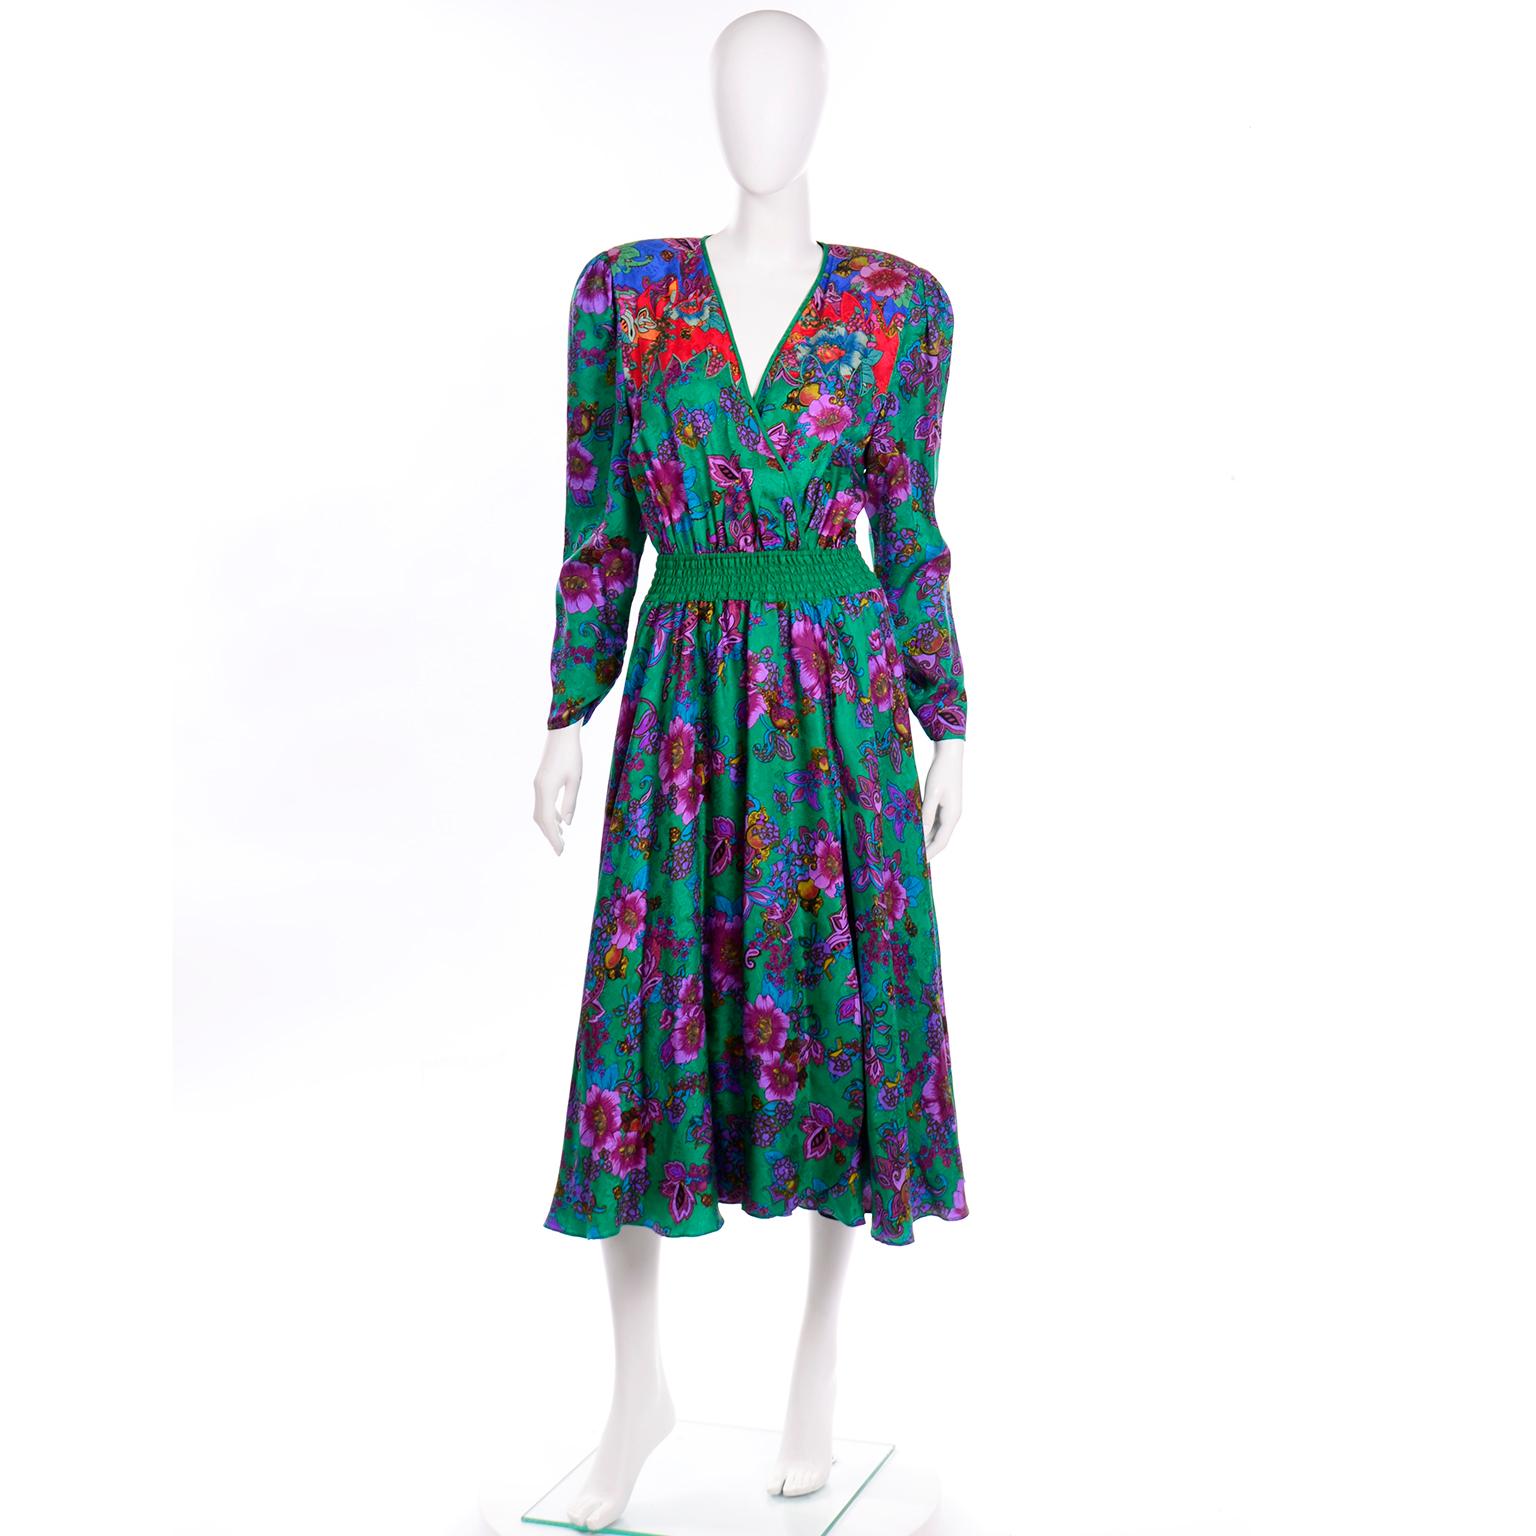 This vintage 1980's Diane Freis long sleeve dress is an easy piece to incorporate into a modern wardrobe! We love vintage Diane Freis dresses because she designed them to fit a range of sizes and she used the most beautiful floral printed fabrics!